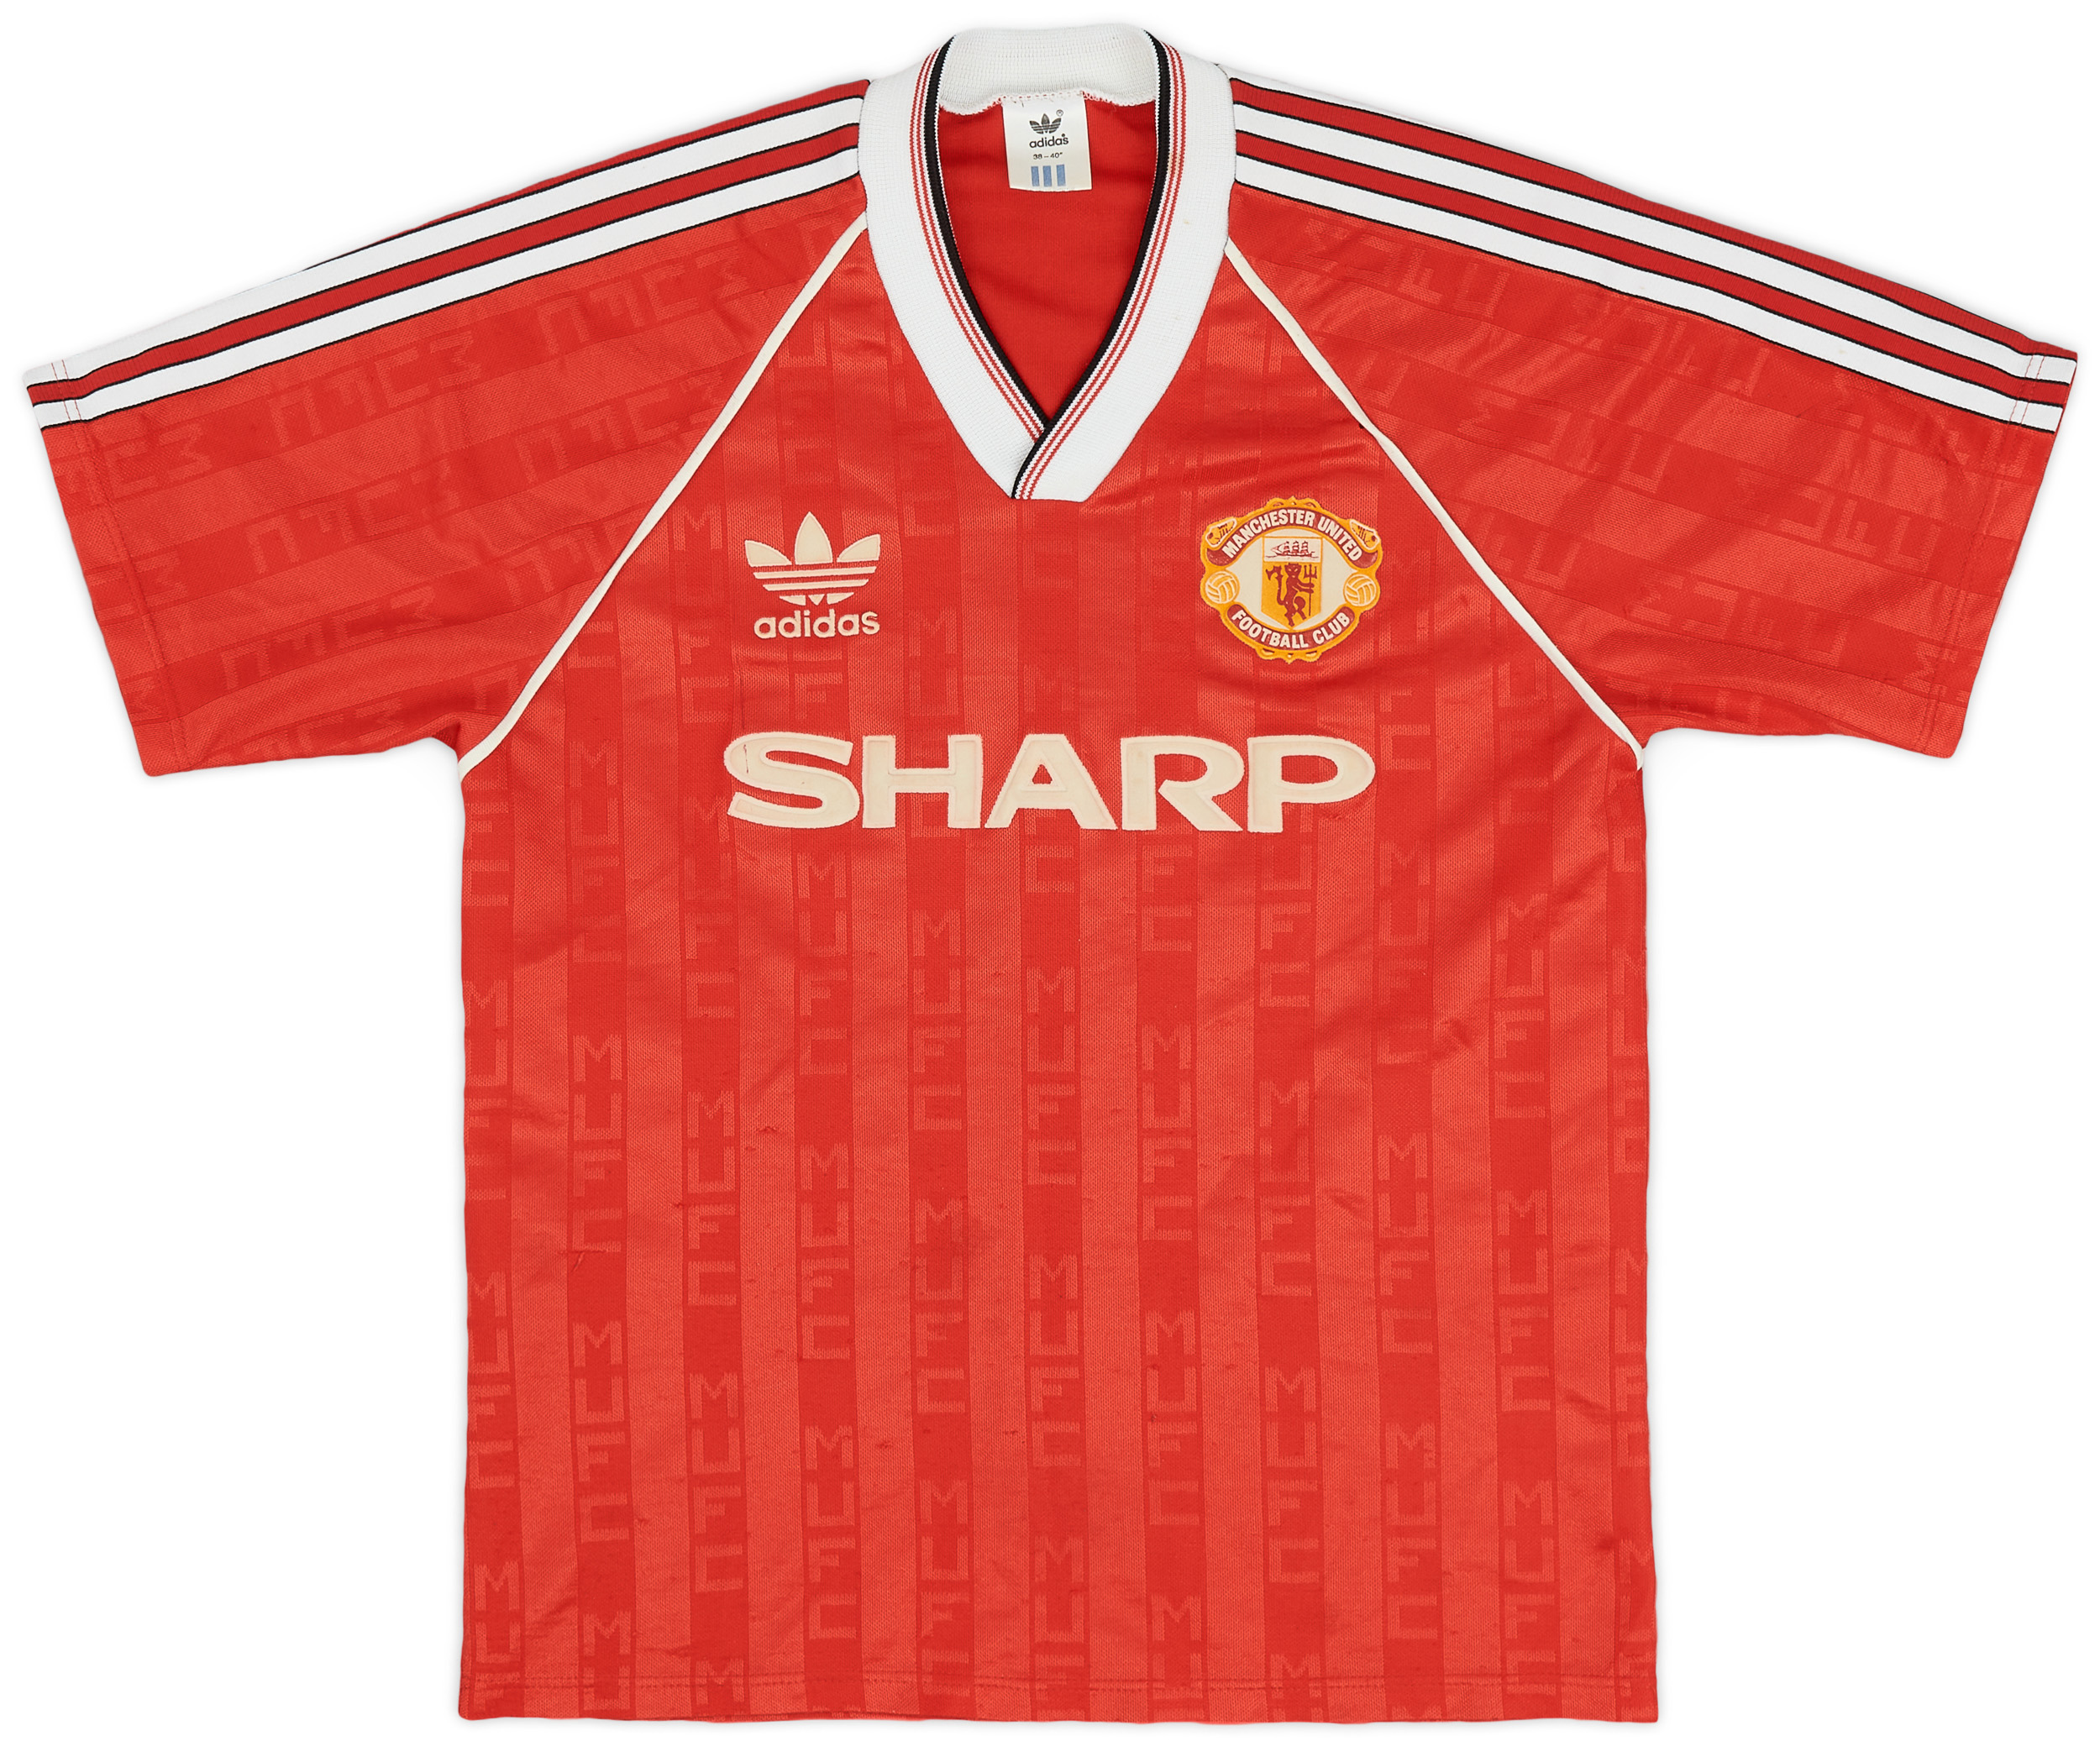 1988-90 Manchester United Home Shirt - 8/10 - ()